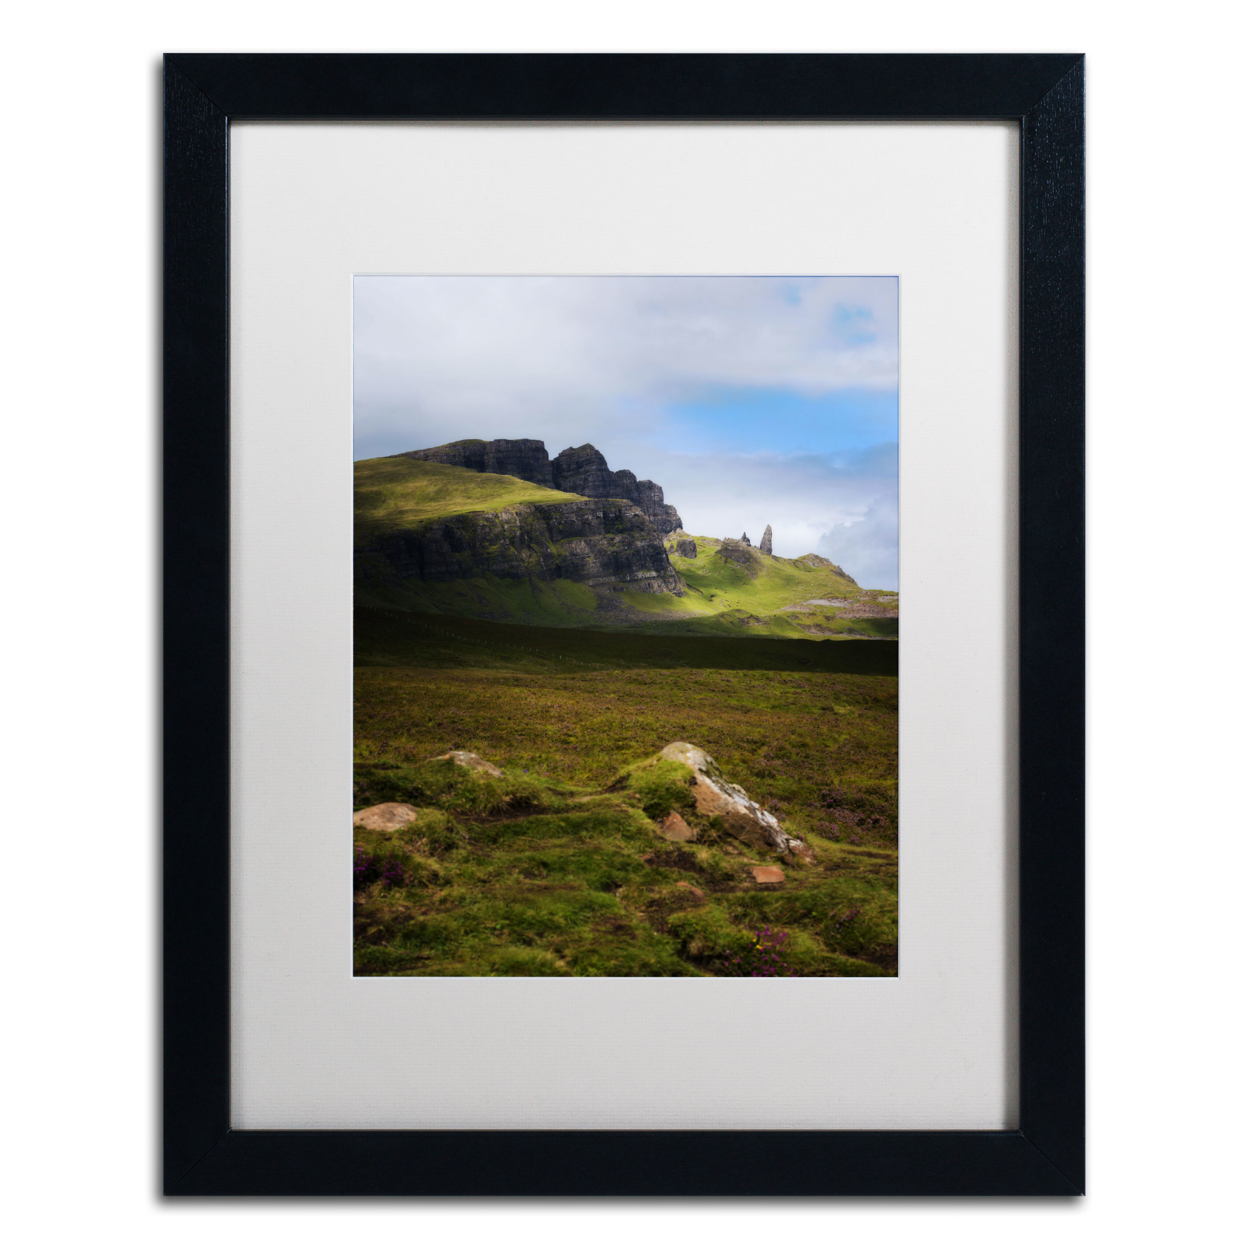 Philippe Sainte-Laudy 'Old Man Of Storr' Black Wooden Framed Art 18 X 22 Inches